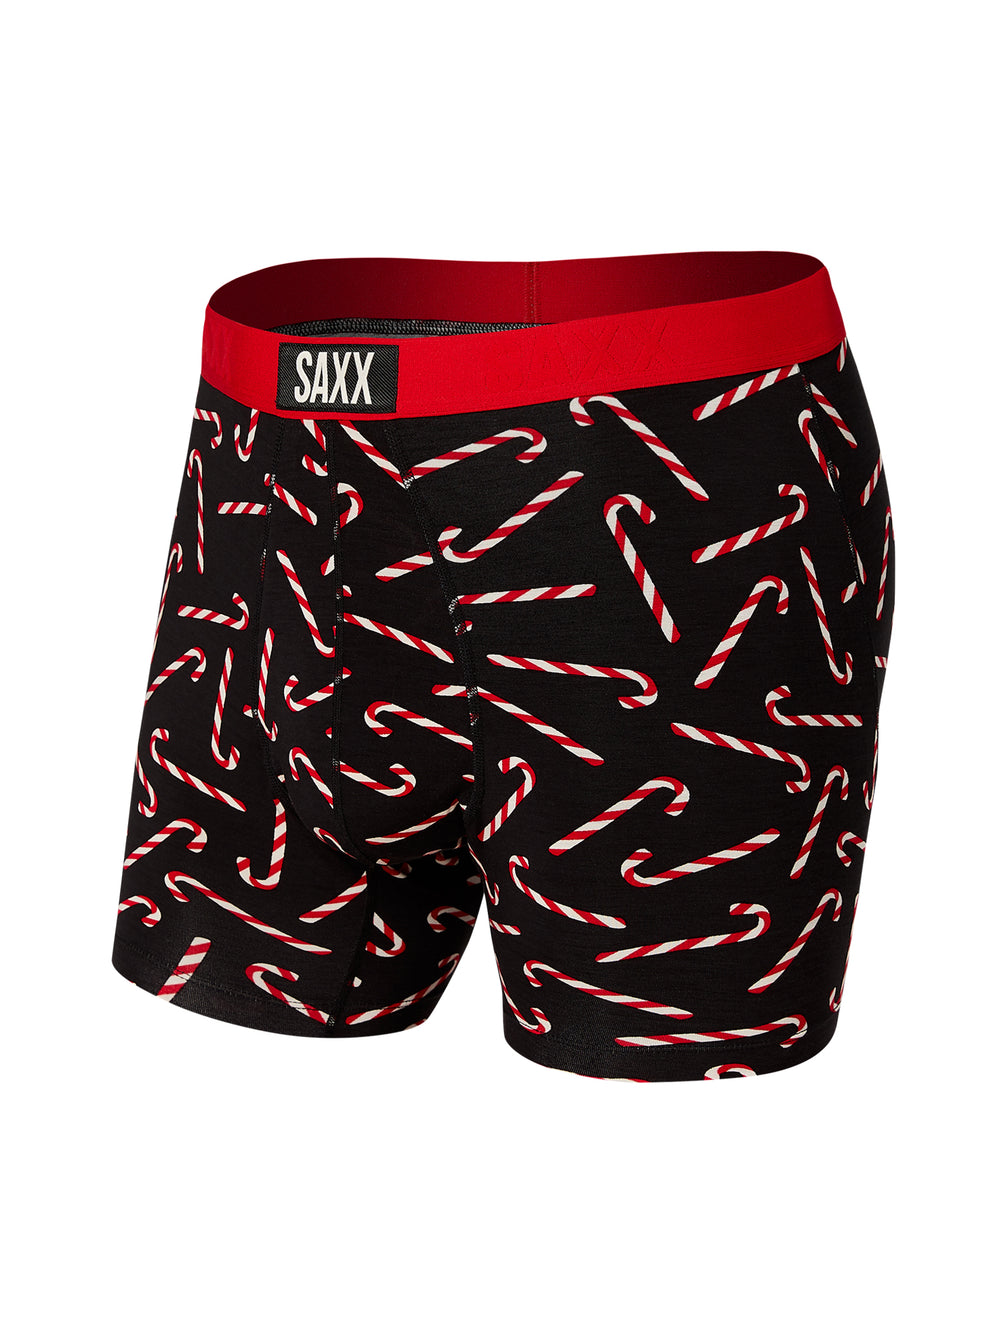 SAXX VIBE BOXER BRIEFING - CANDY CANES